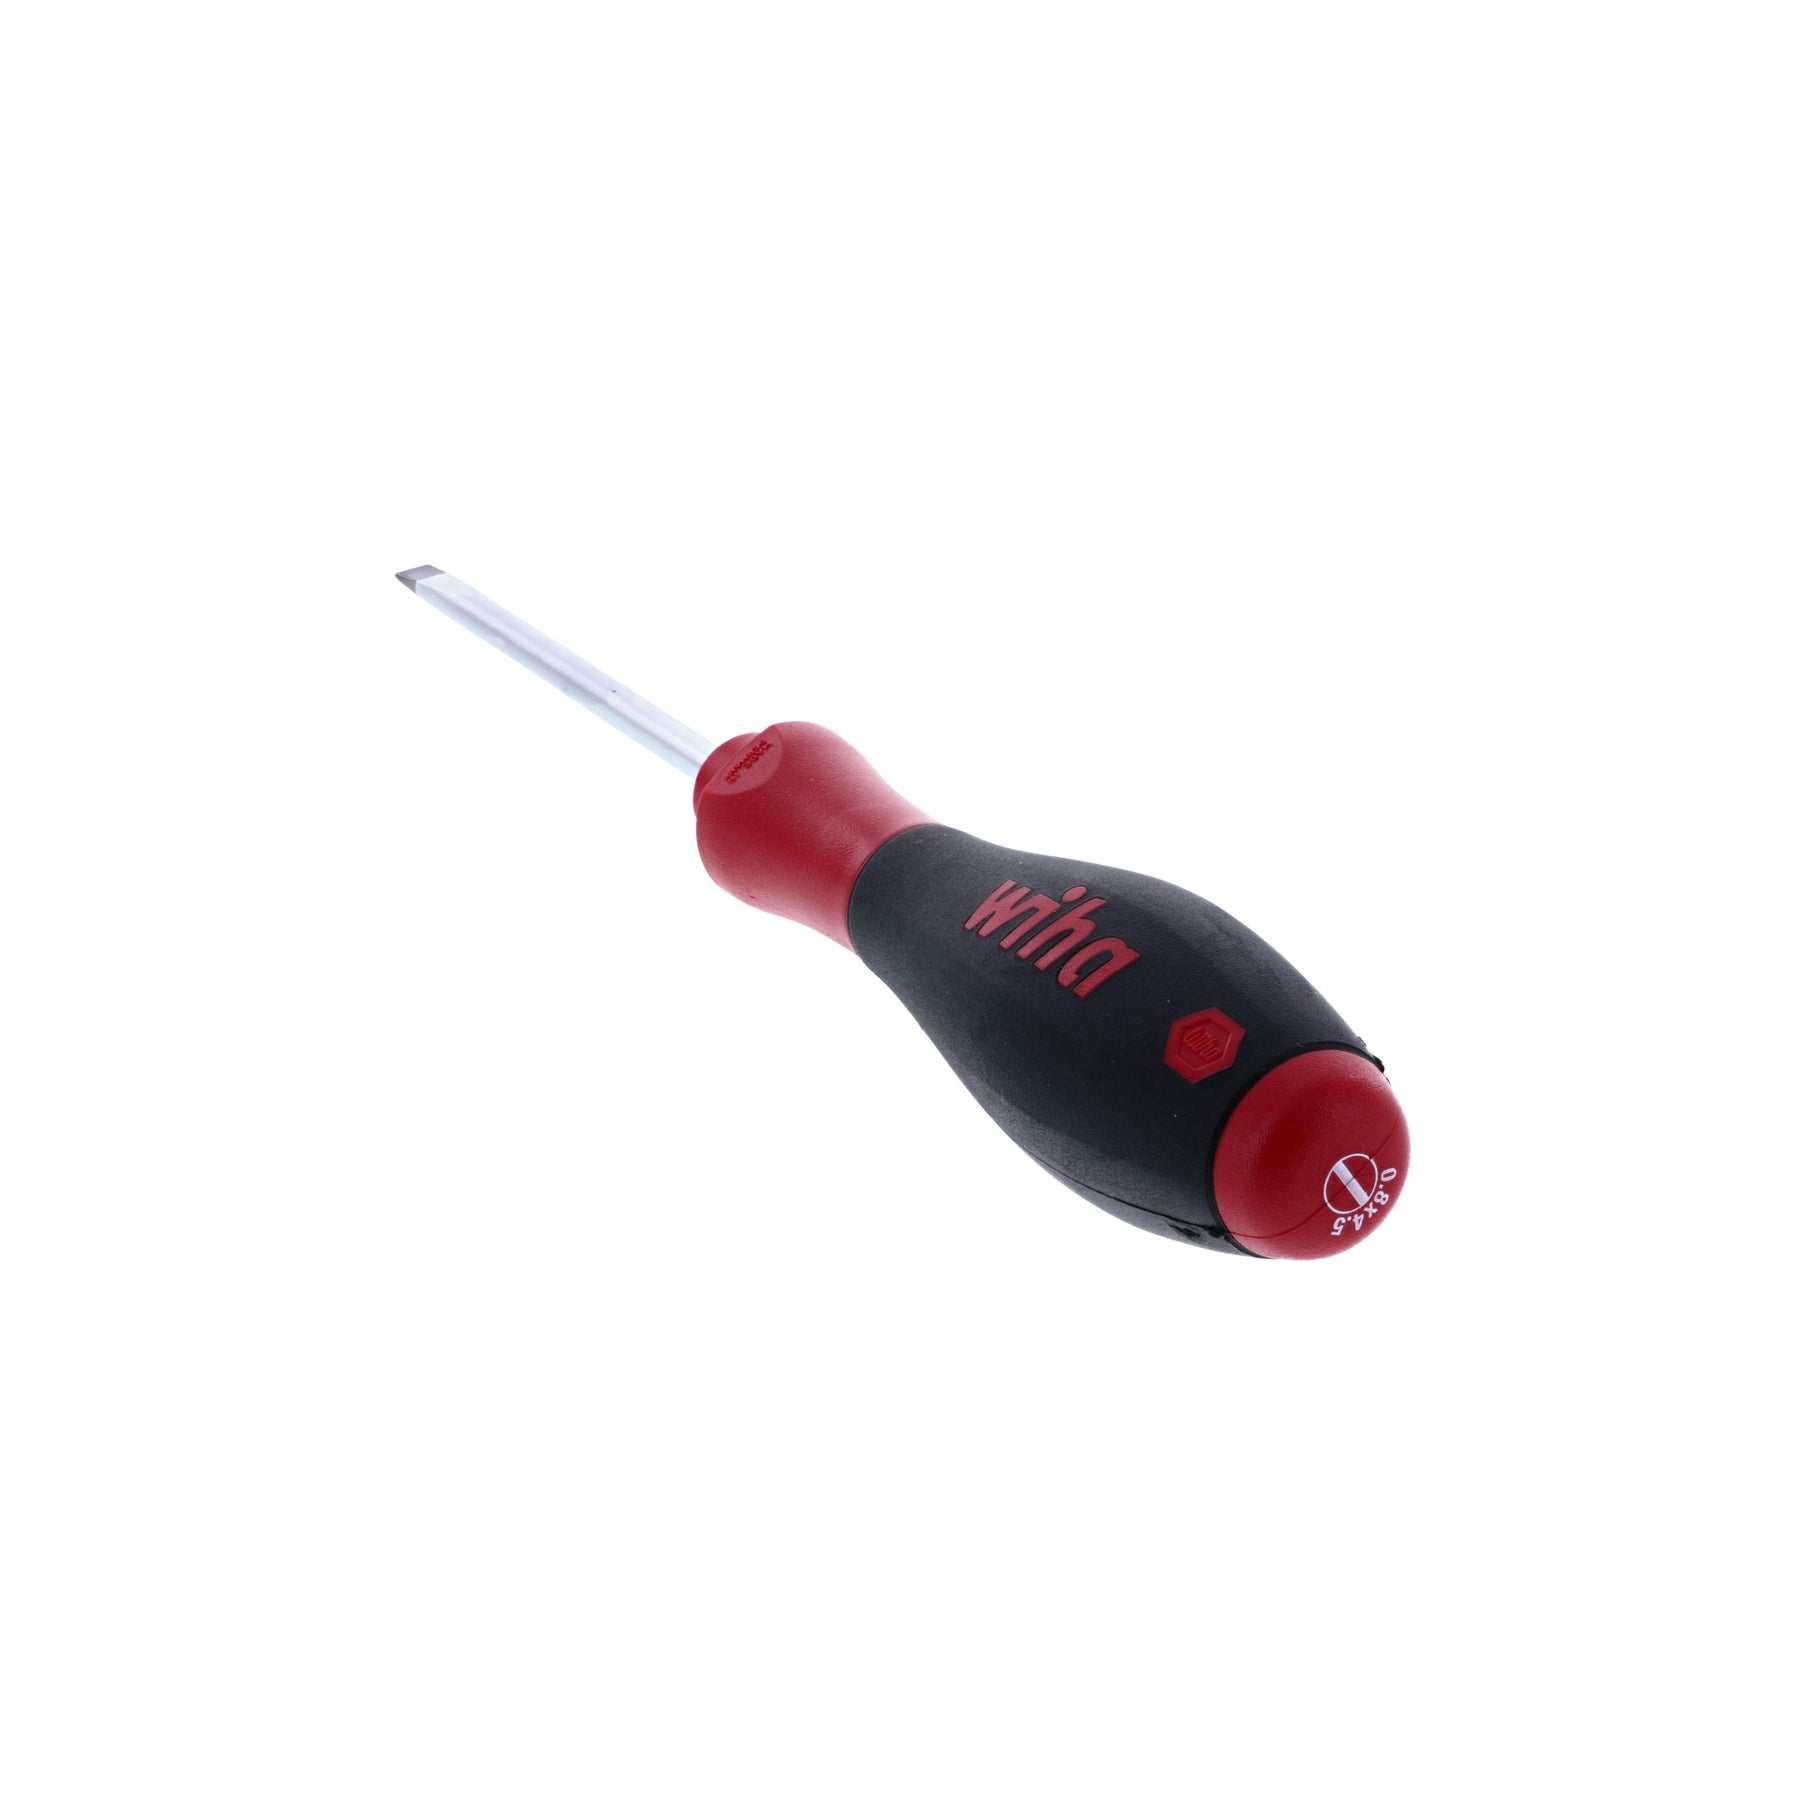 SoftFinish Slotted Screwdriver 4.5mm x 80mm